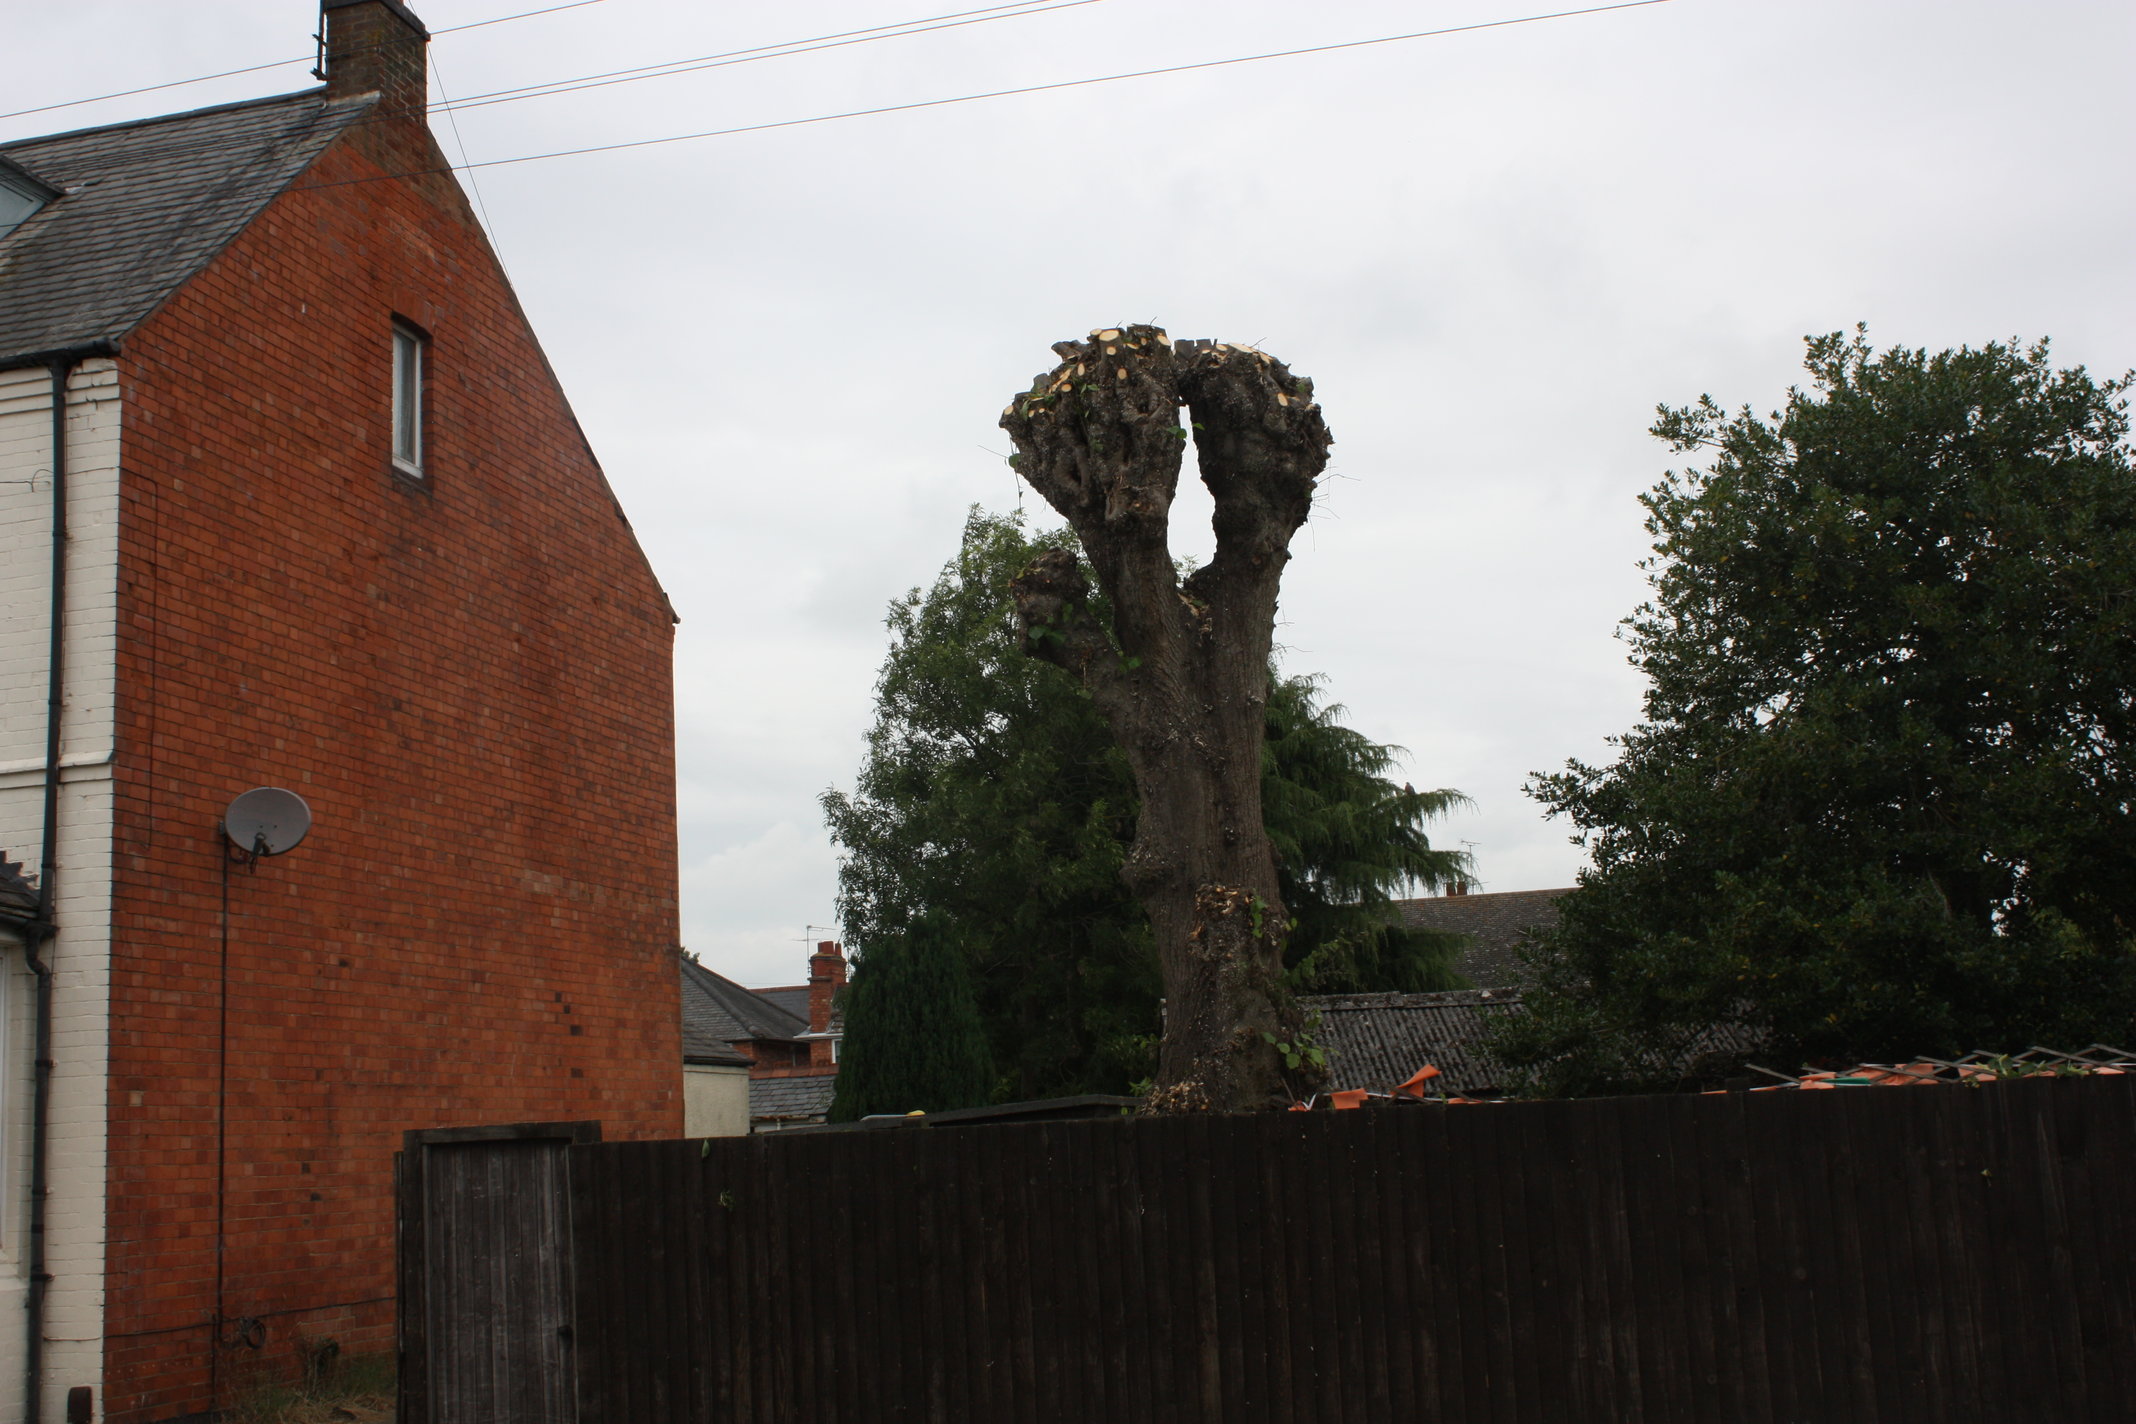 Pollarded lime tree - after picture